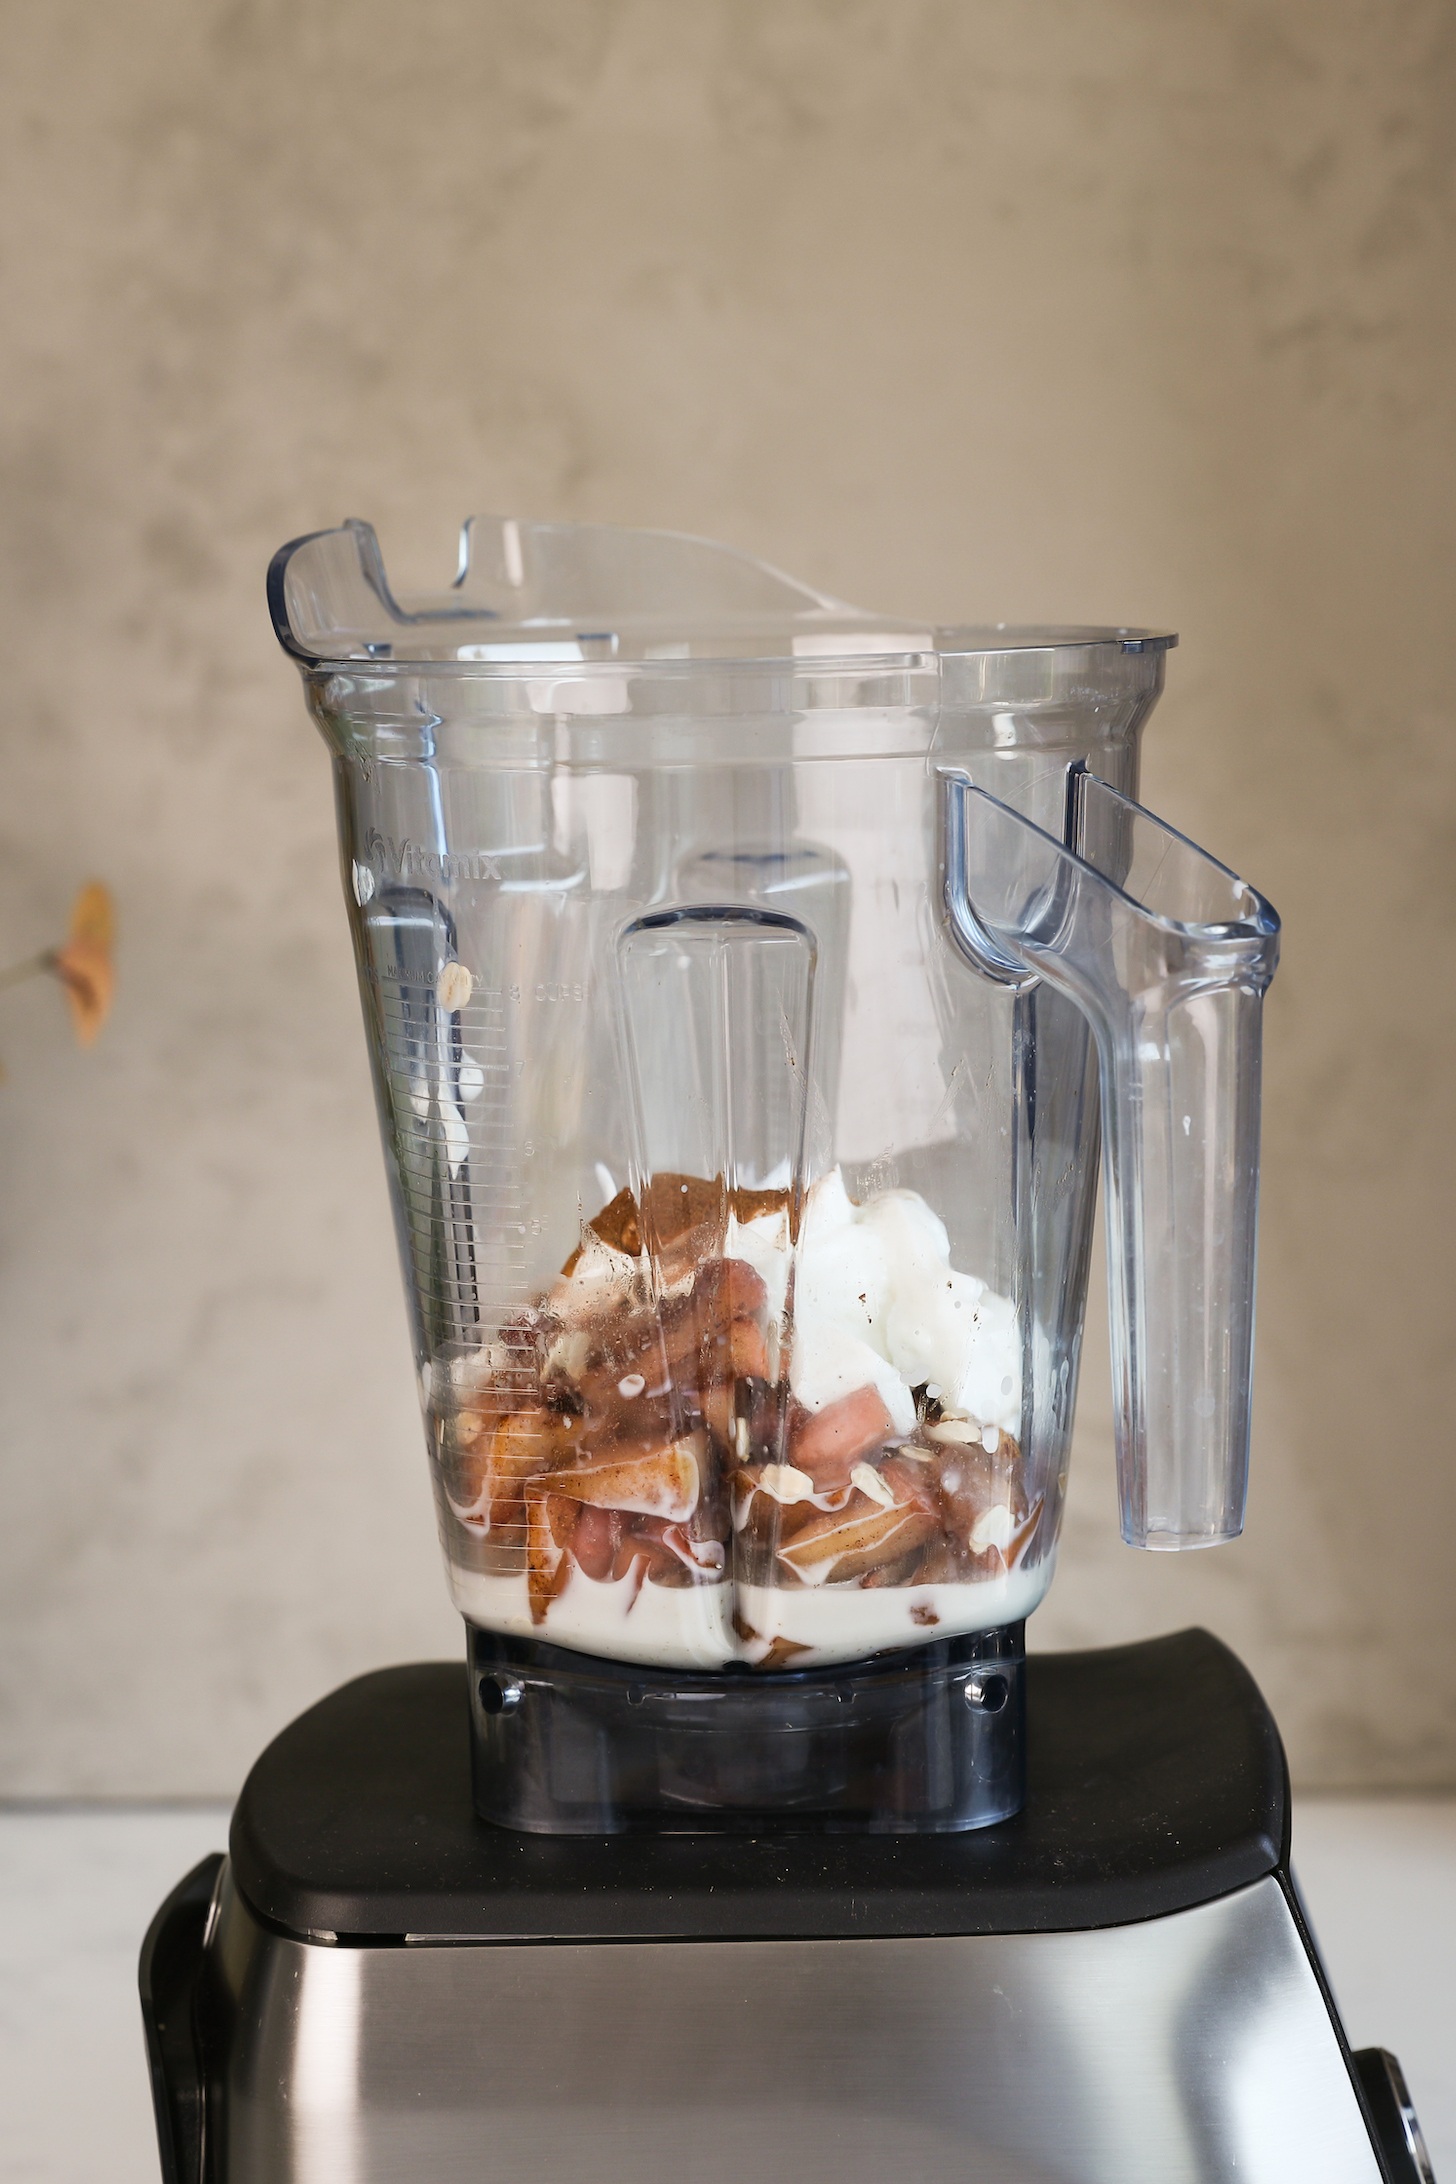 A blender with yogurt, milk, apple slices and spices.